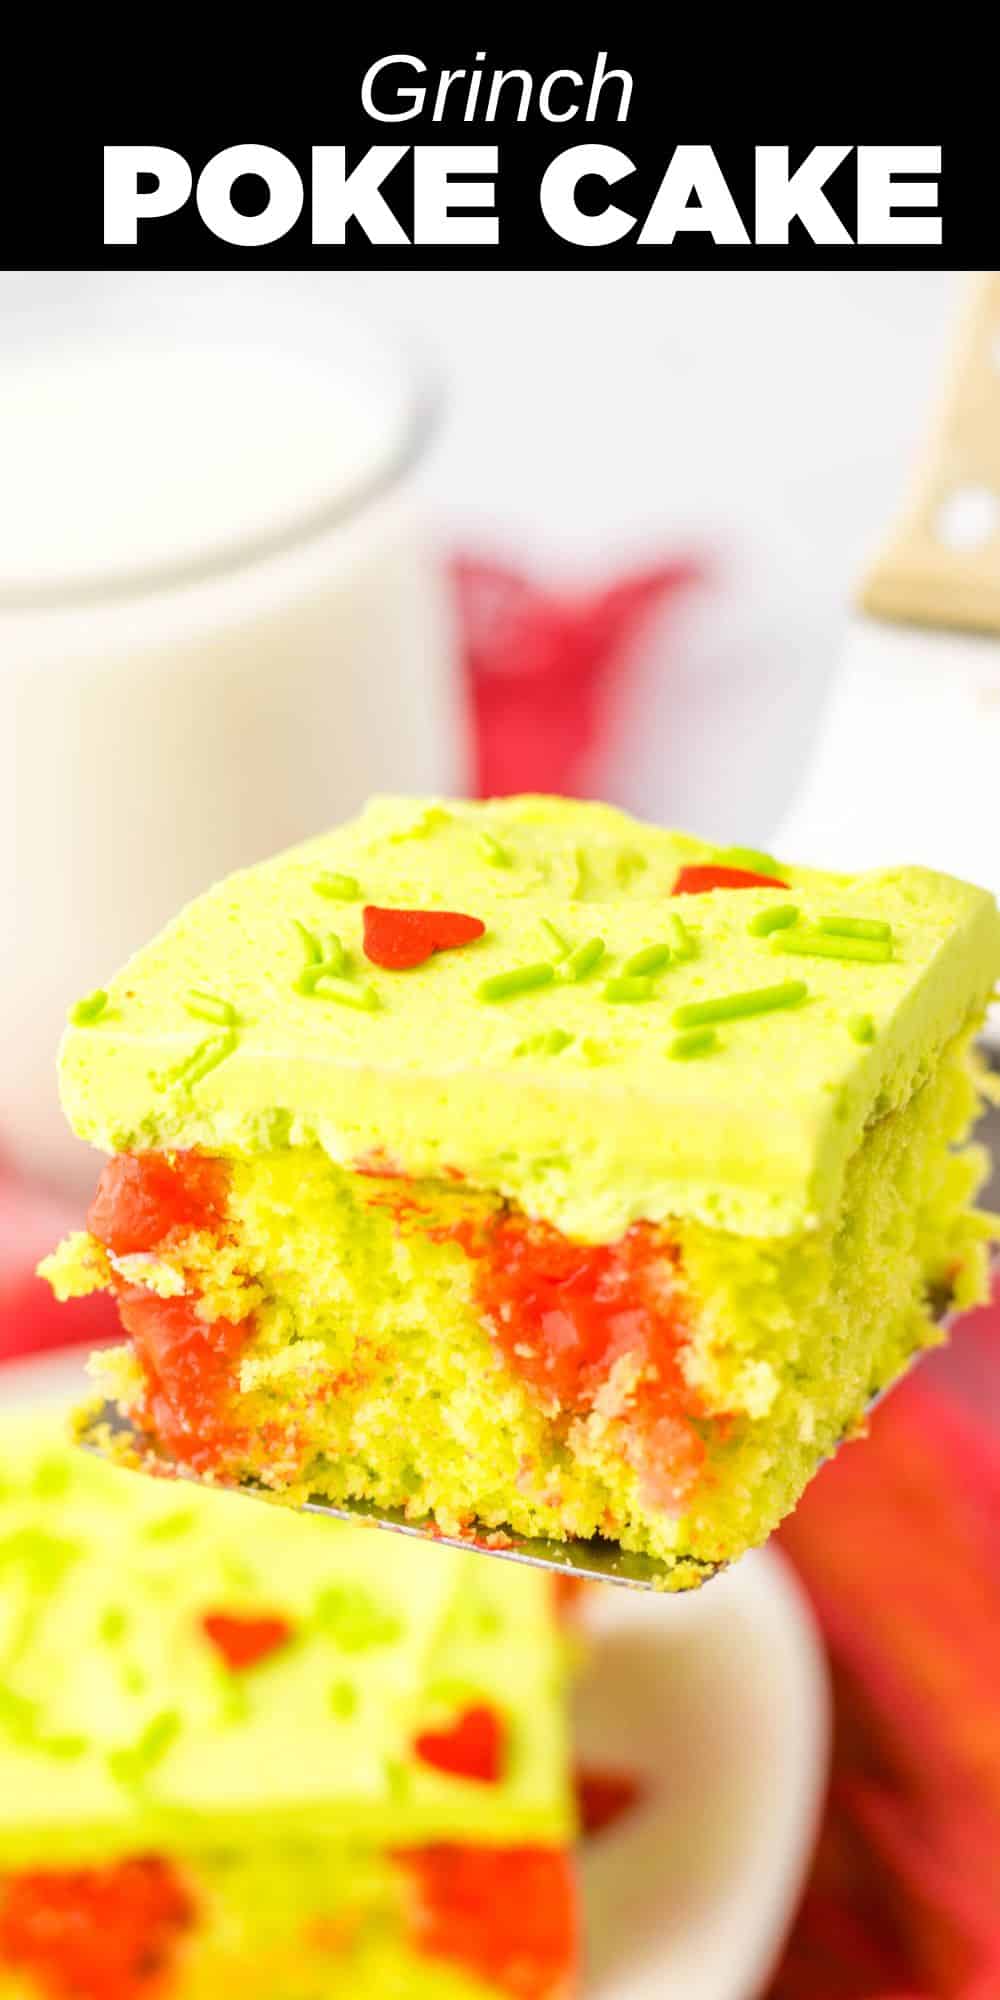 Celebrate the holiday season with this fun and festive Grinch Poke Cake. A vibrant green, moist cake is filled with red cheesecake pudding and topped with creamy buttercream frosting. Heart sprinkles are added to create the perfect Christmas dessert!